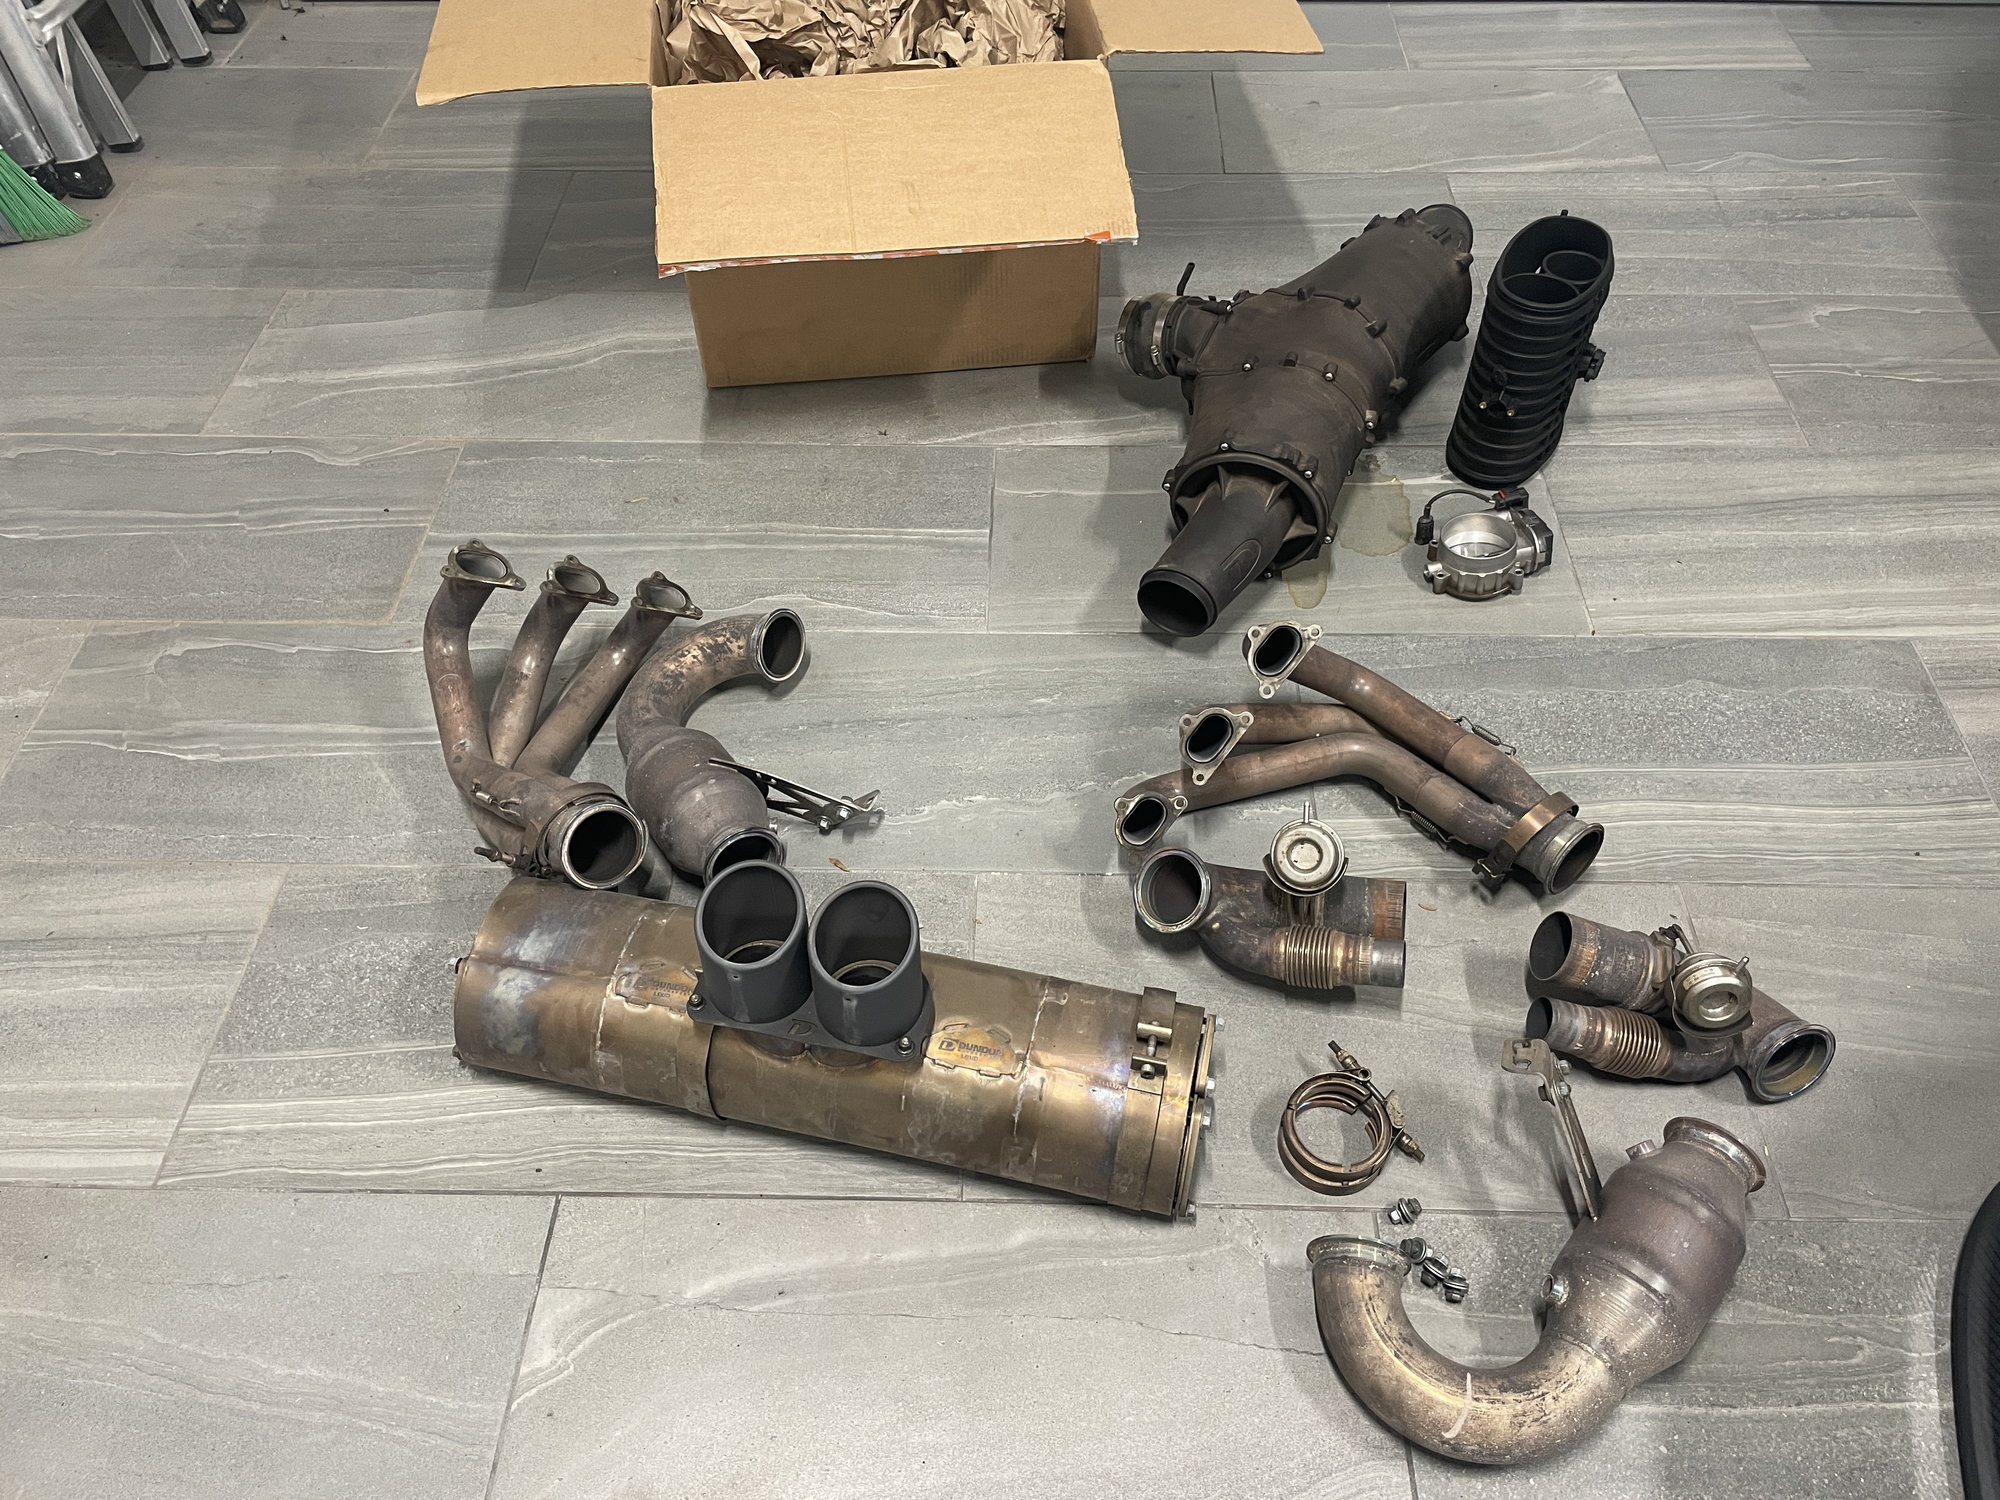 Engine - Exhaust - Dundon Full Exhaust and Power Kit - Used - 2018 to 2019 Porsche 911 - Gilbert, AZ 85297, United States